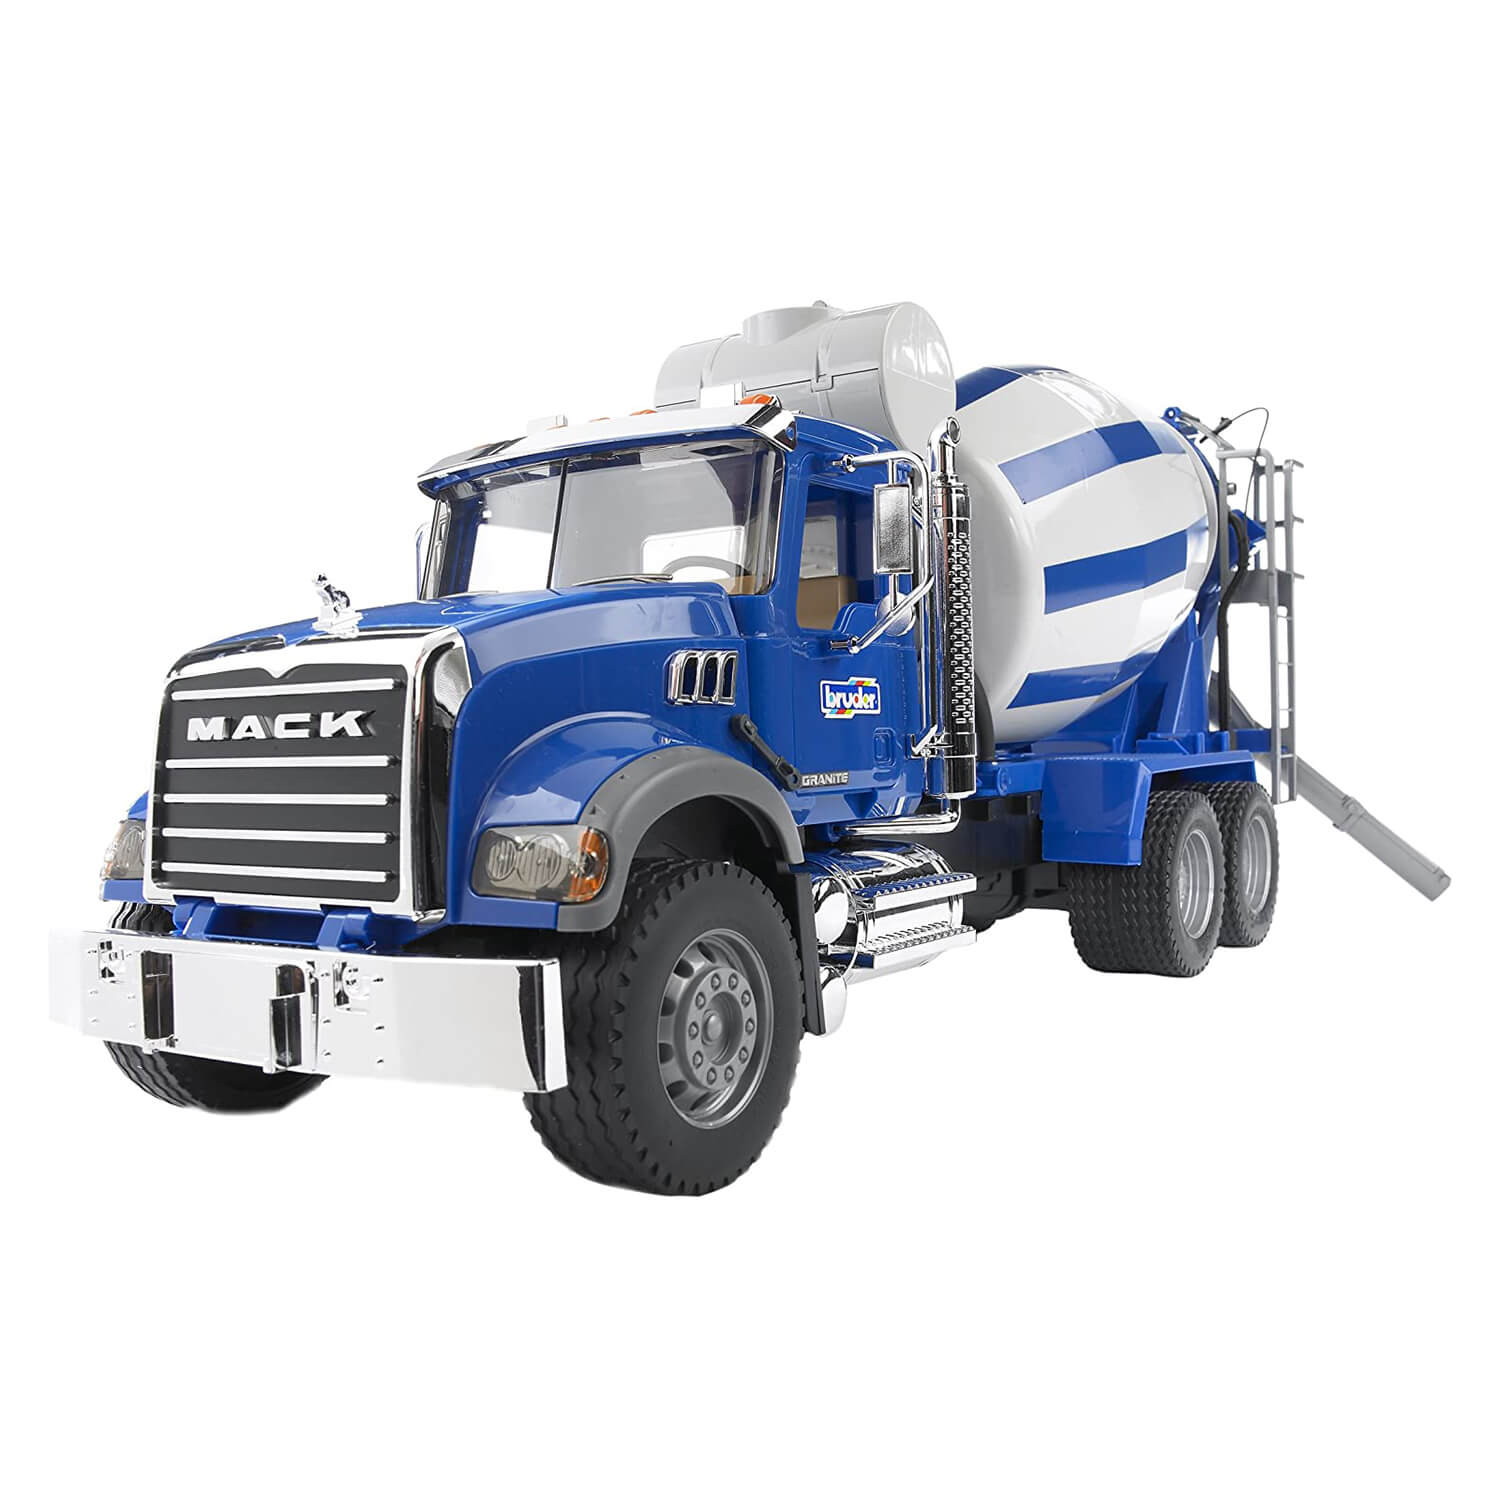 Bruder Pro Series Mack Granite Cement Mixer 1:16 Scale Vehicle front-quarter angle.